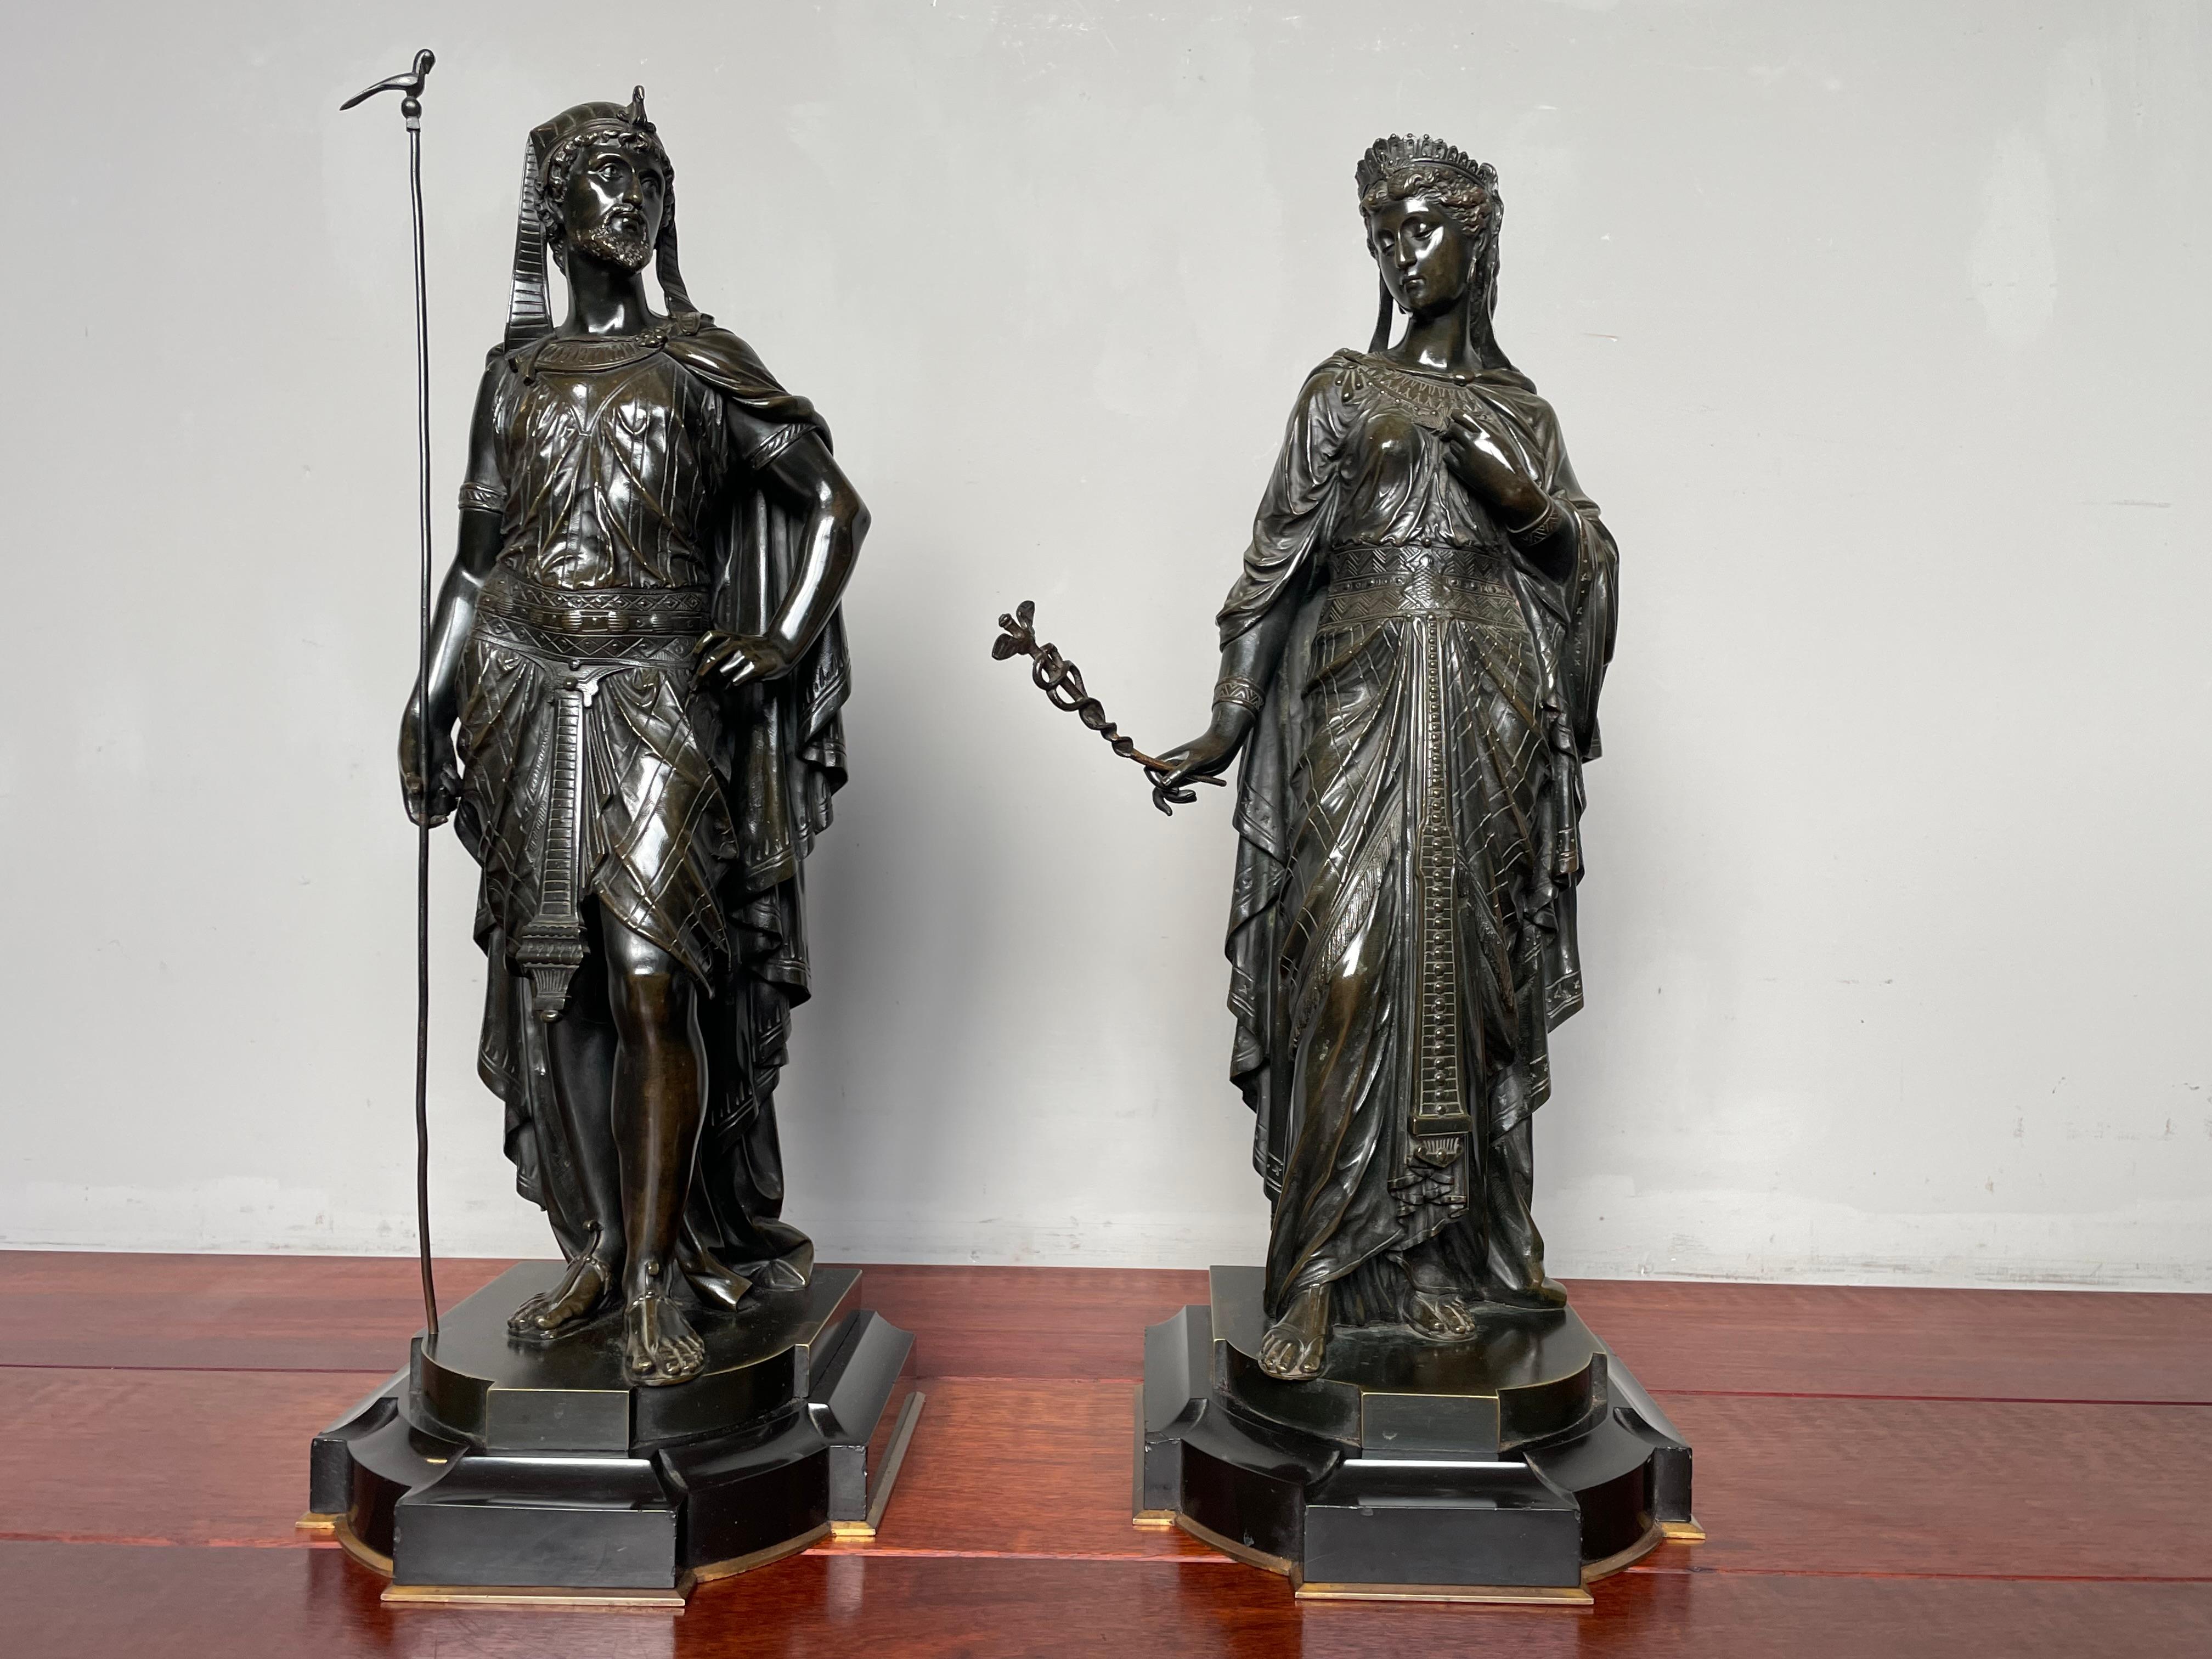 Egyptian Revival Large Pair of Antique Bronze Egyptian Priest & Priestess Sculptures By E. Bouret For Sale